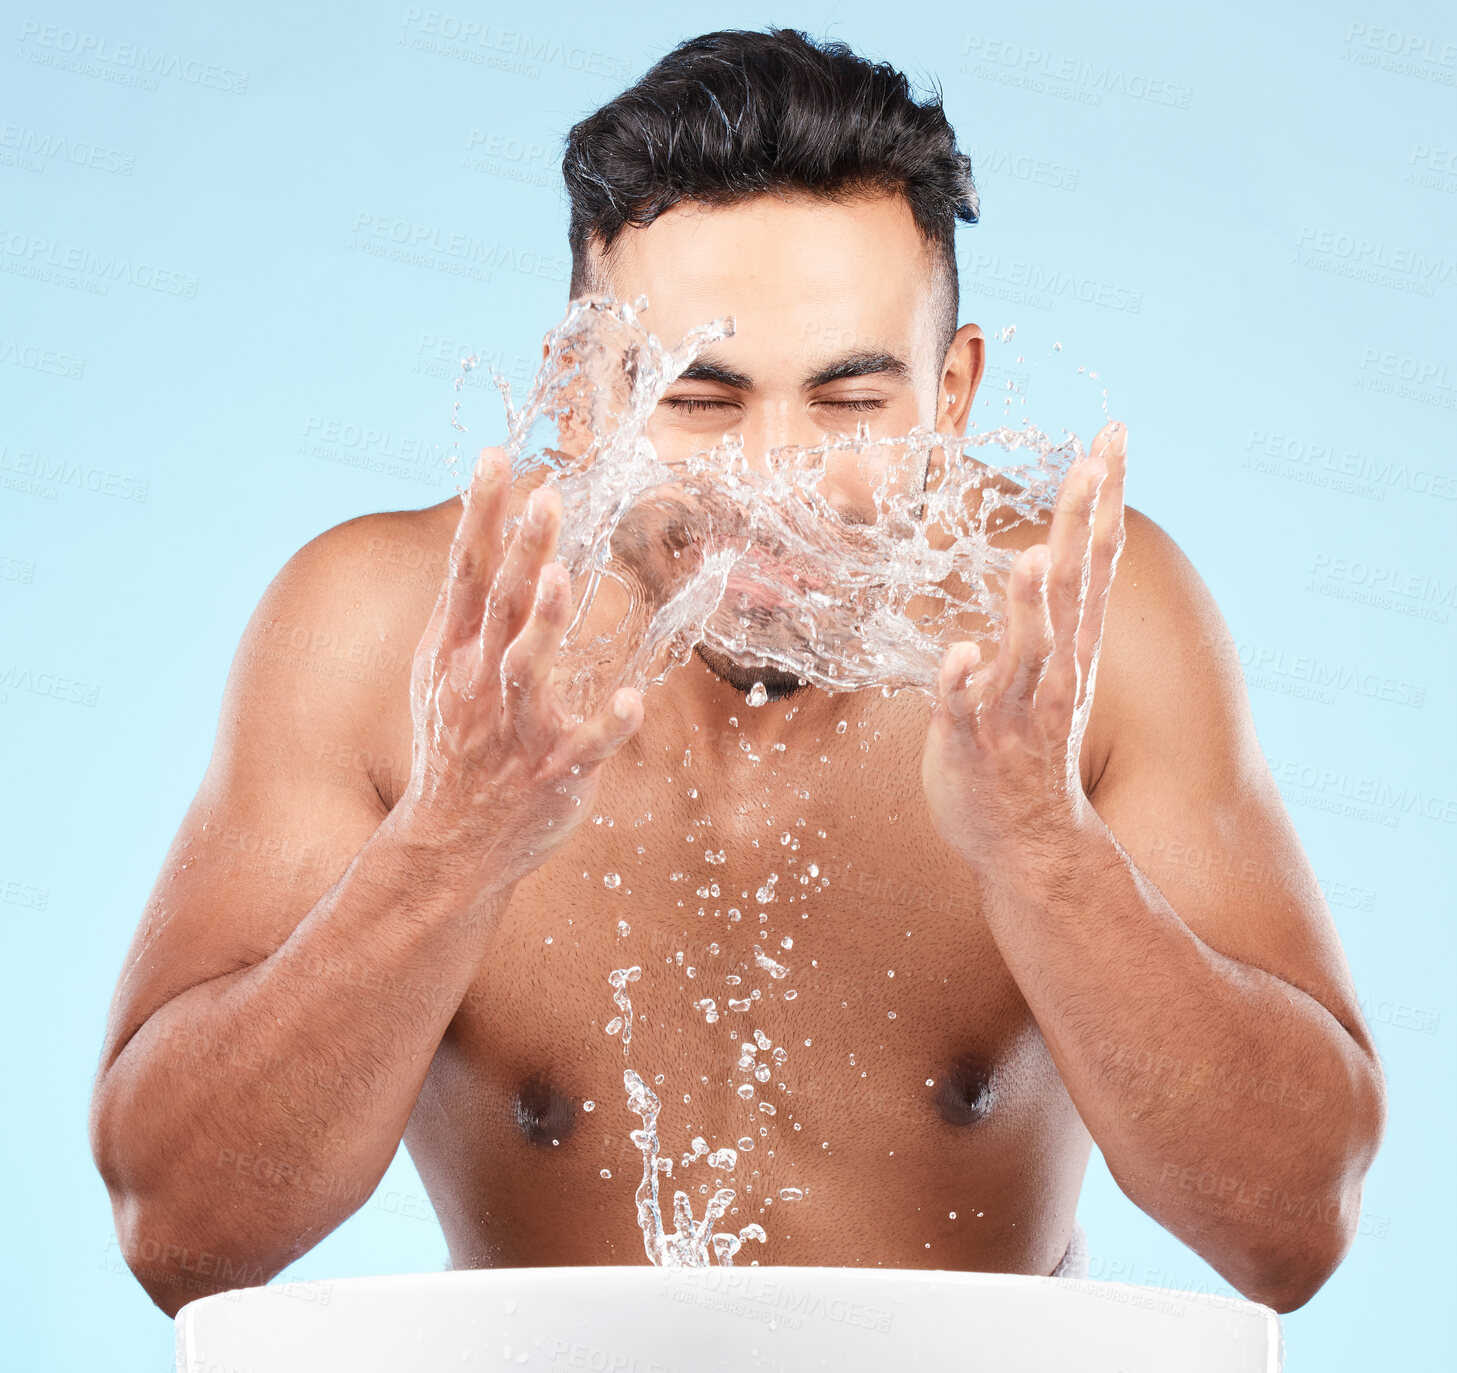 Buy stock photo Face, water splash and skincare of man cleaning in studio isolated on a blue background. Hygiene, water drops and male model washing, bathing or grooming for healthy skin, facial wellness or beauty.